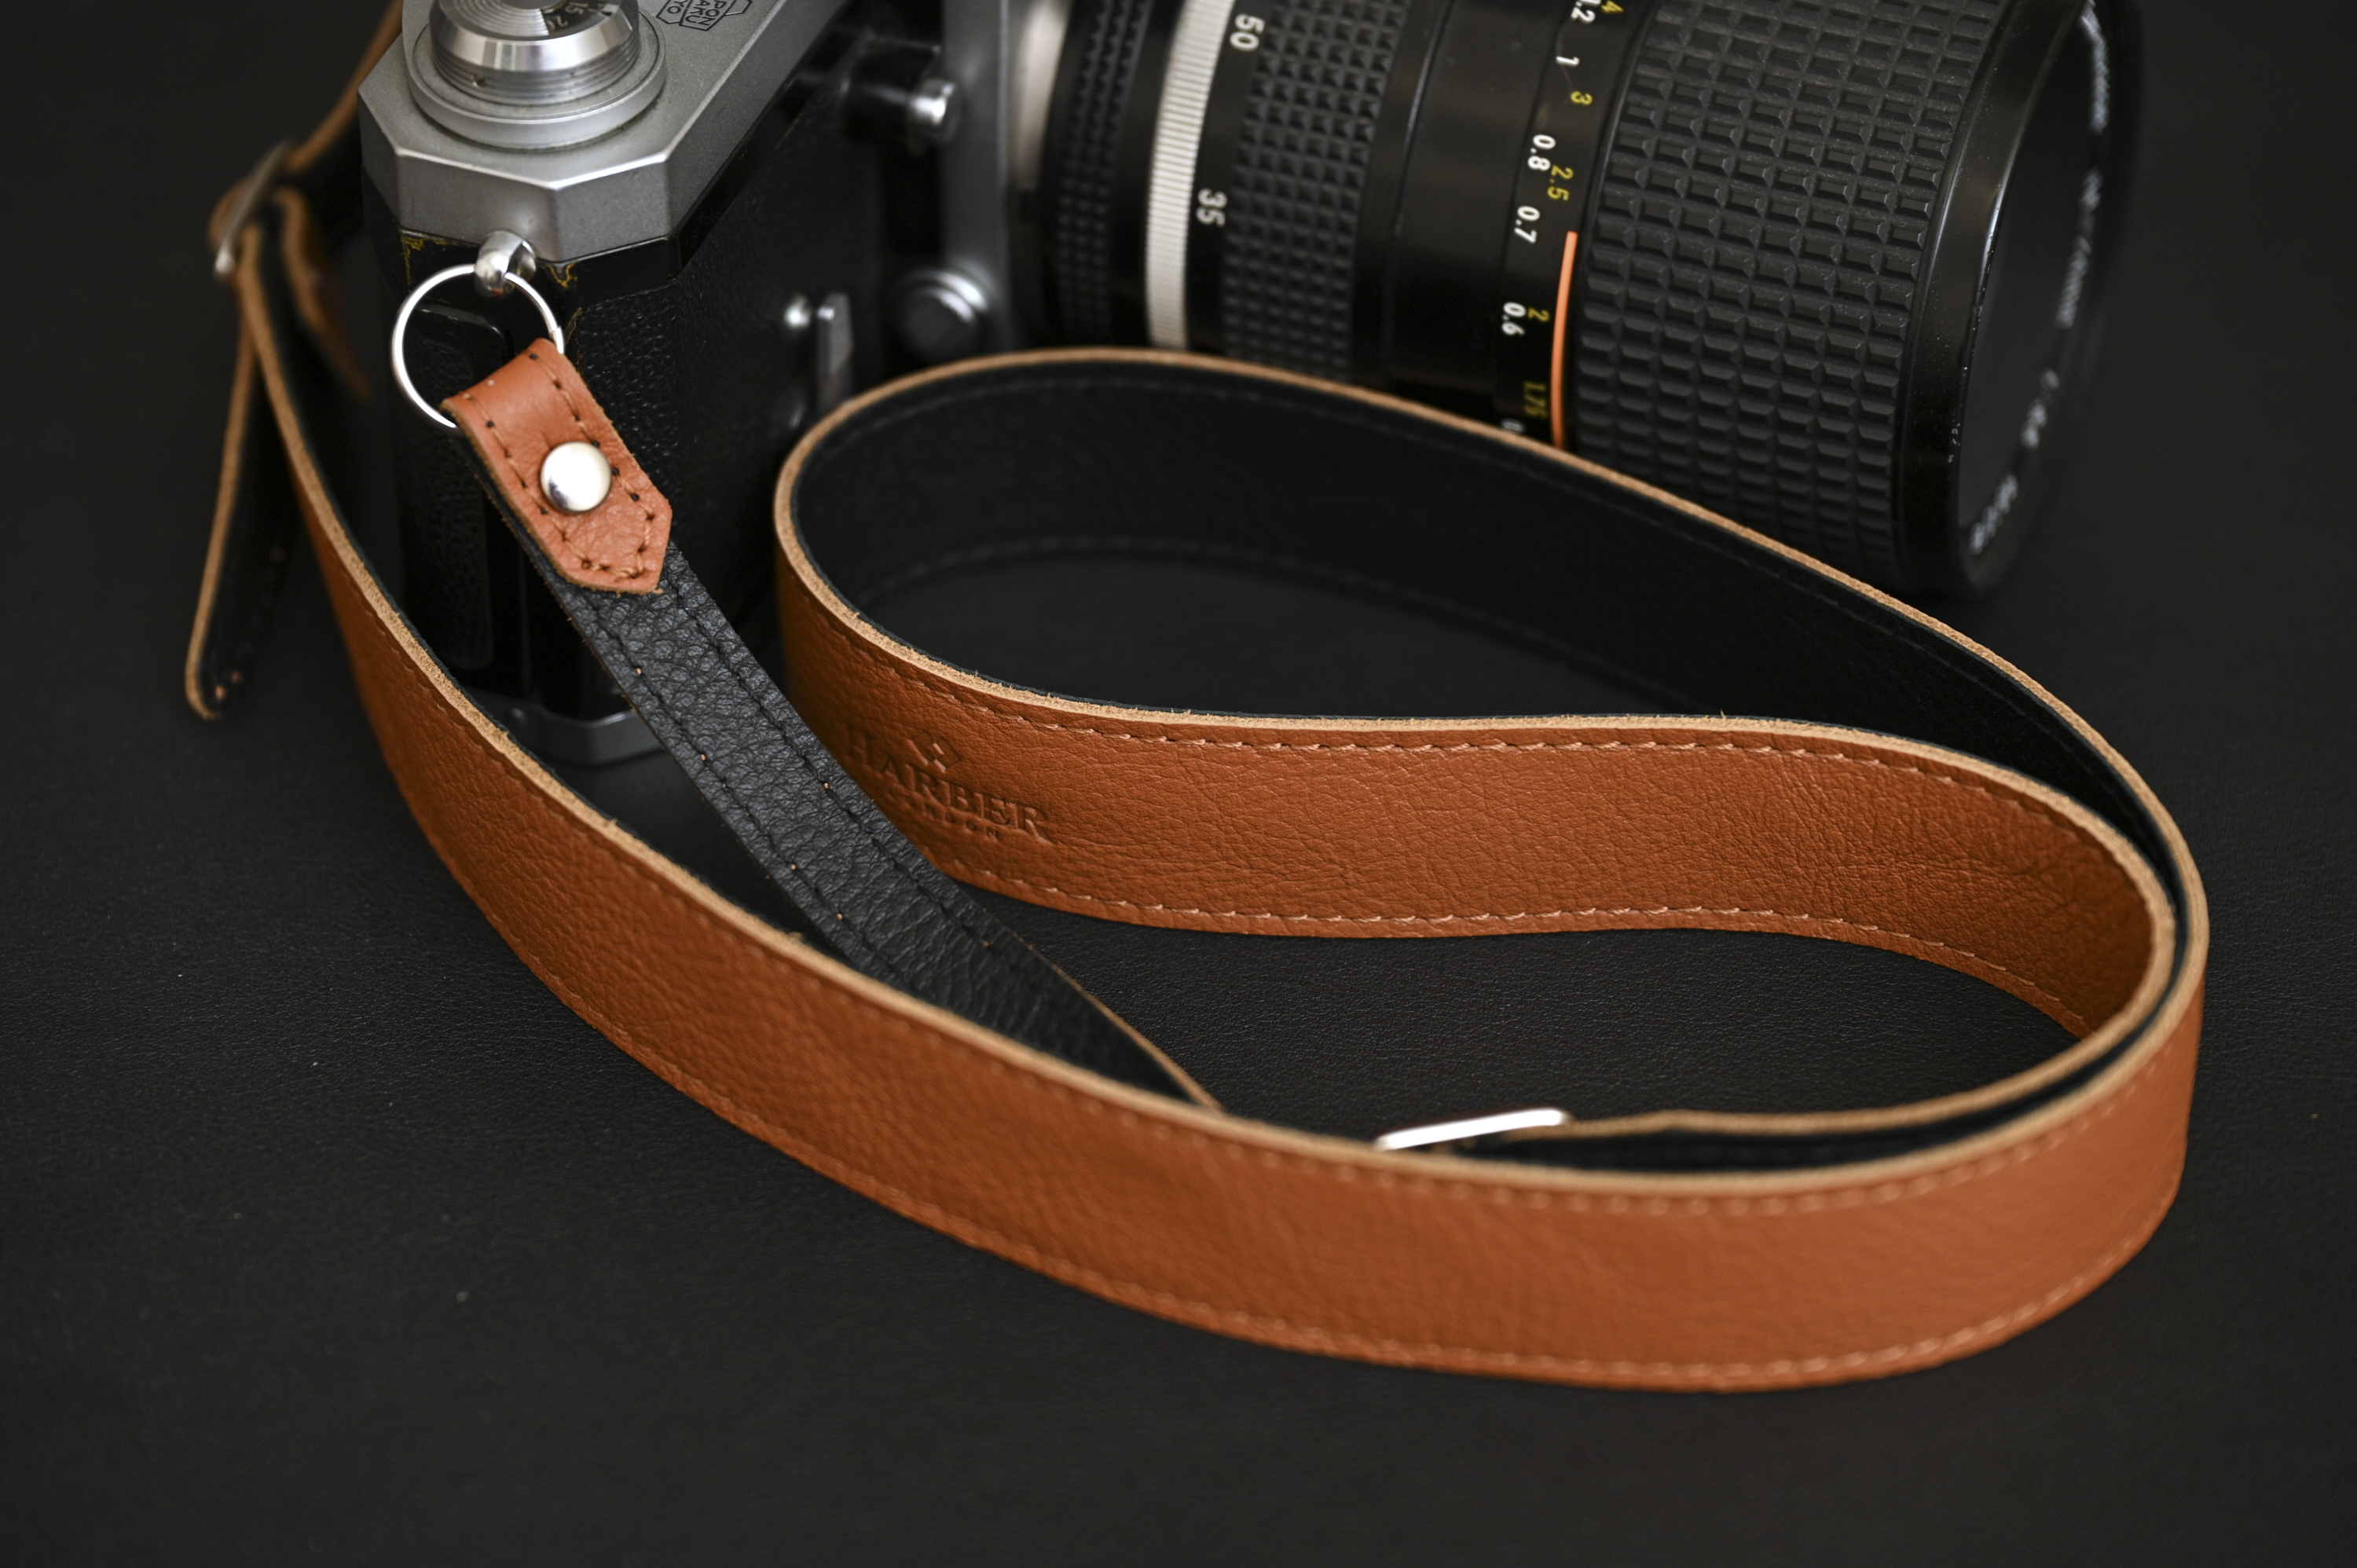 Easy on the Eyes. Harber London Tan Camera Strap Review